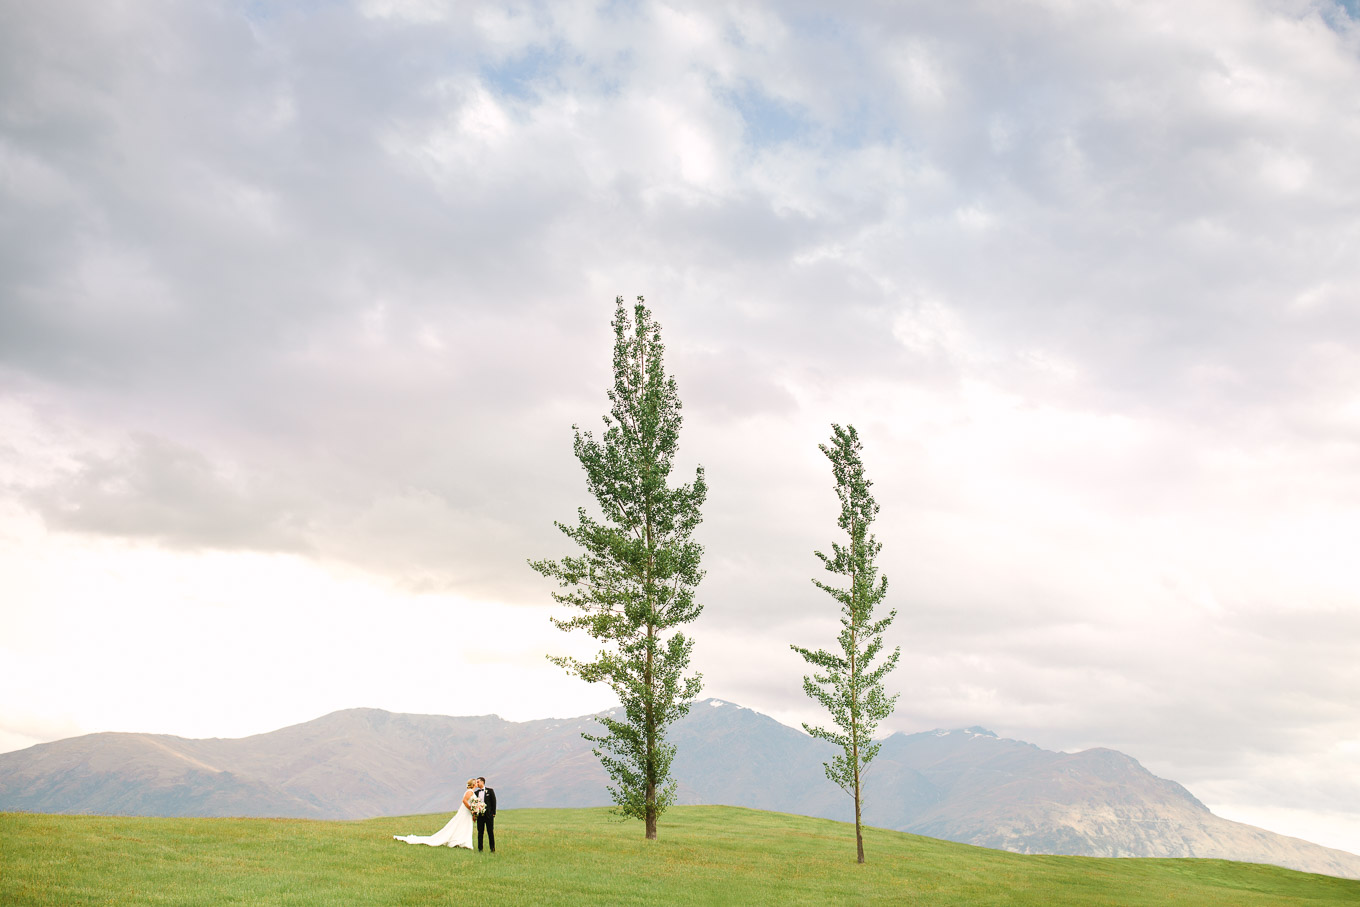 Wedding portrait with two trees on a hillside with Southern Alps in the background. Millbrook Resort Queenstown New Zealand wedding by Mary Costa Photography | www.marycostaweddings.com